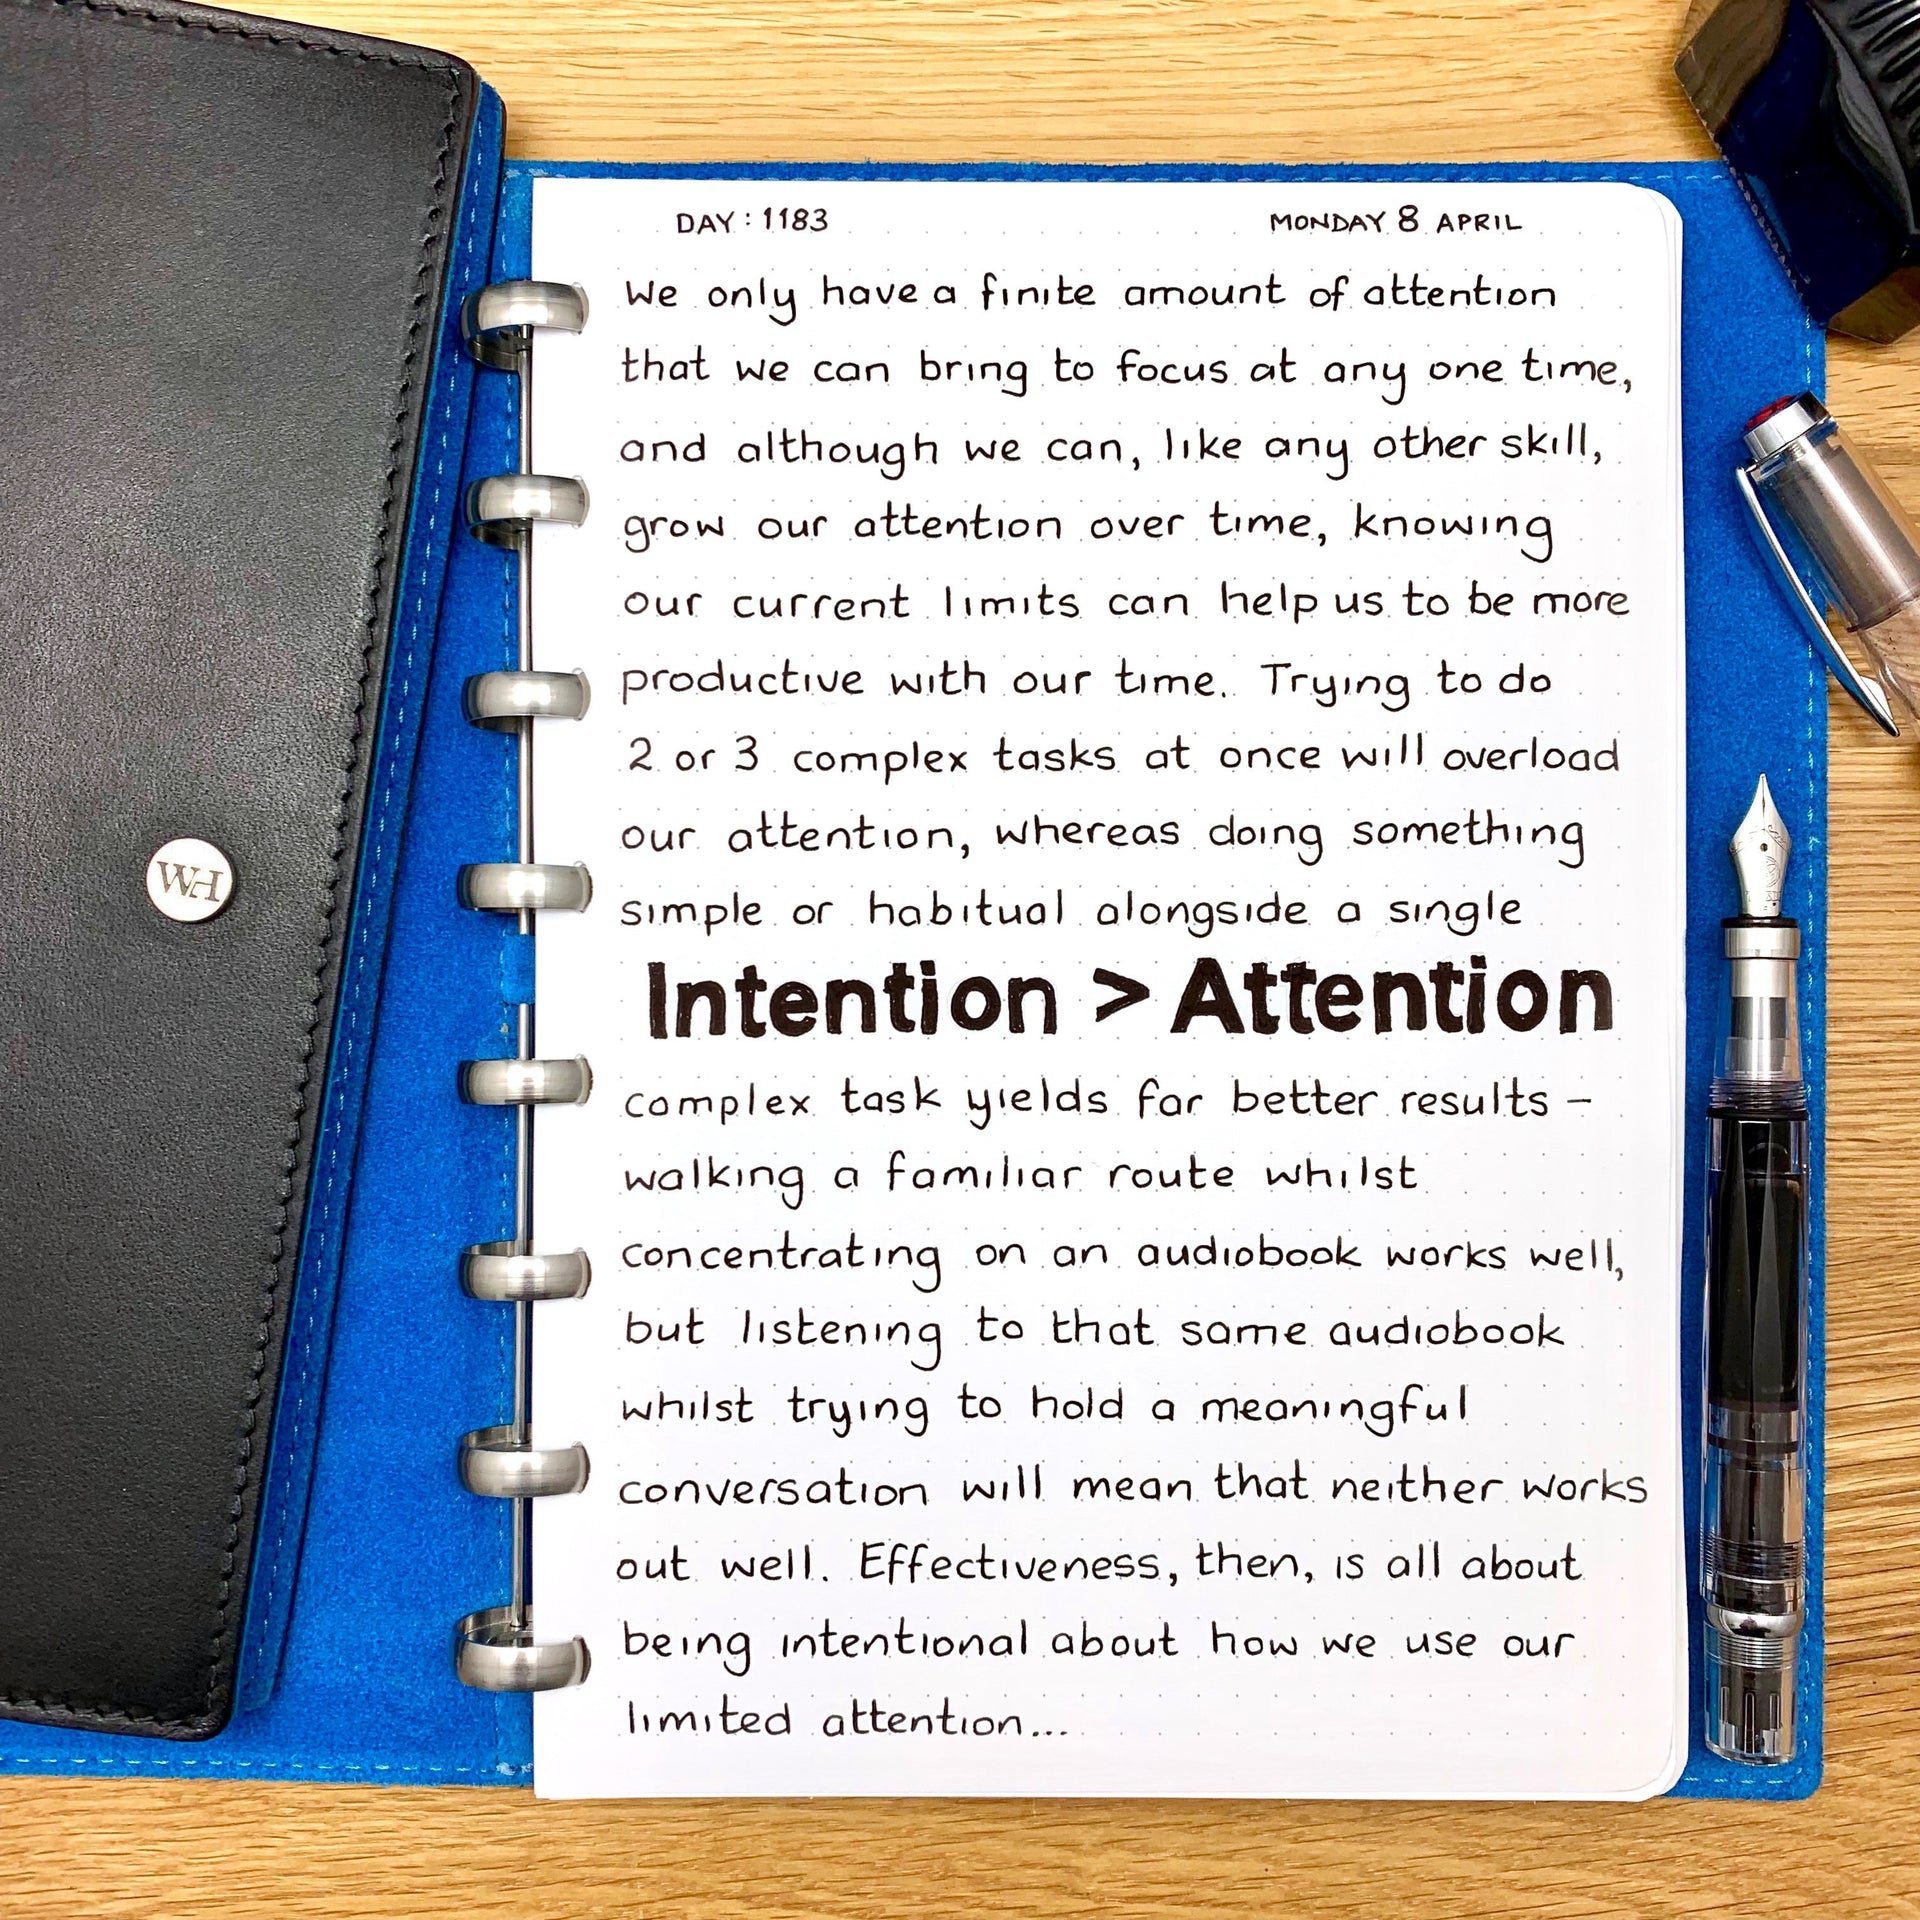 Intention > Attention